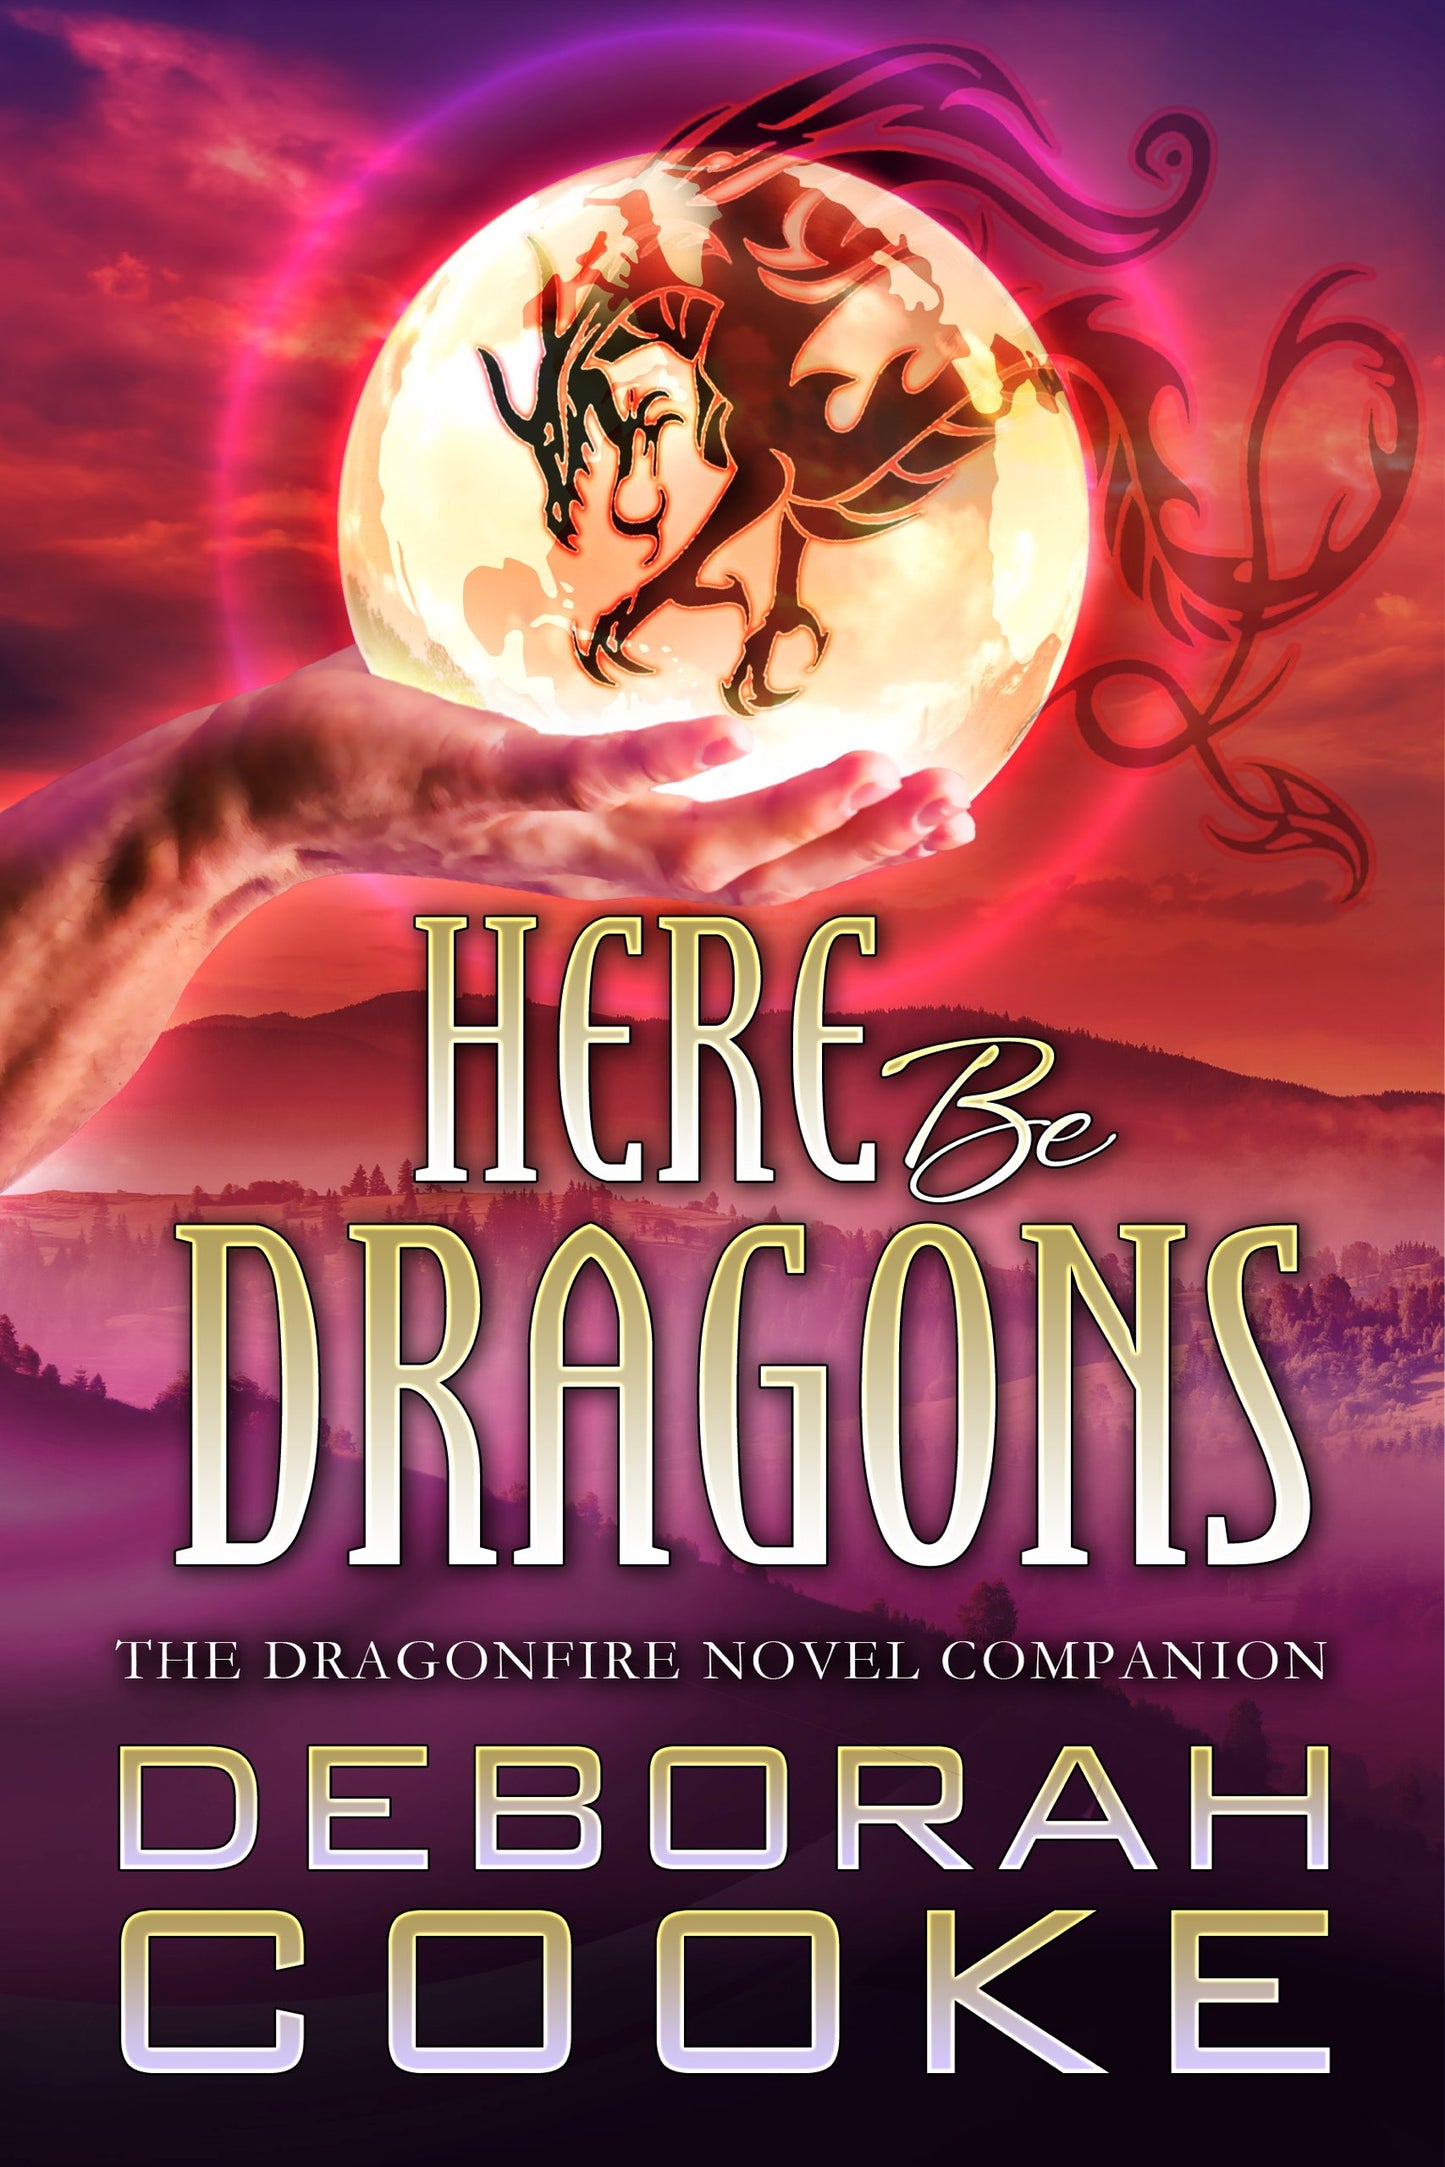 Here Be Dragons: The Dragonfire Companion Trade Paperback - Signed